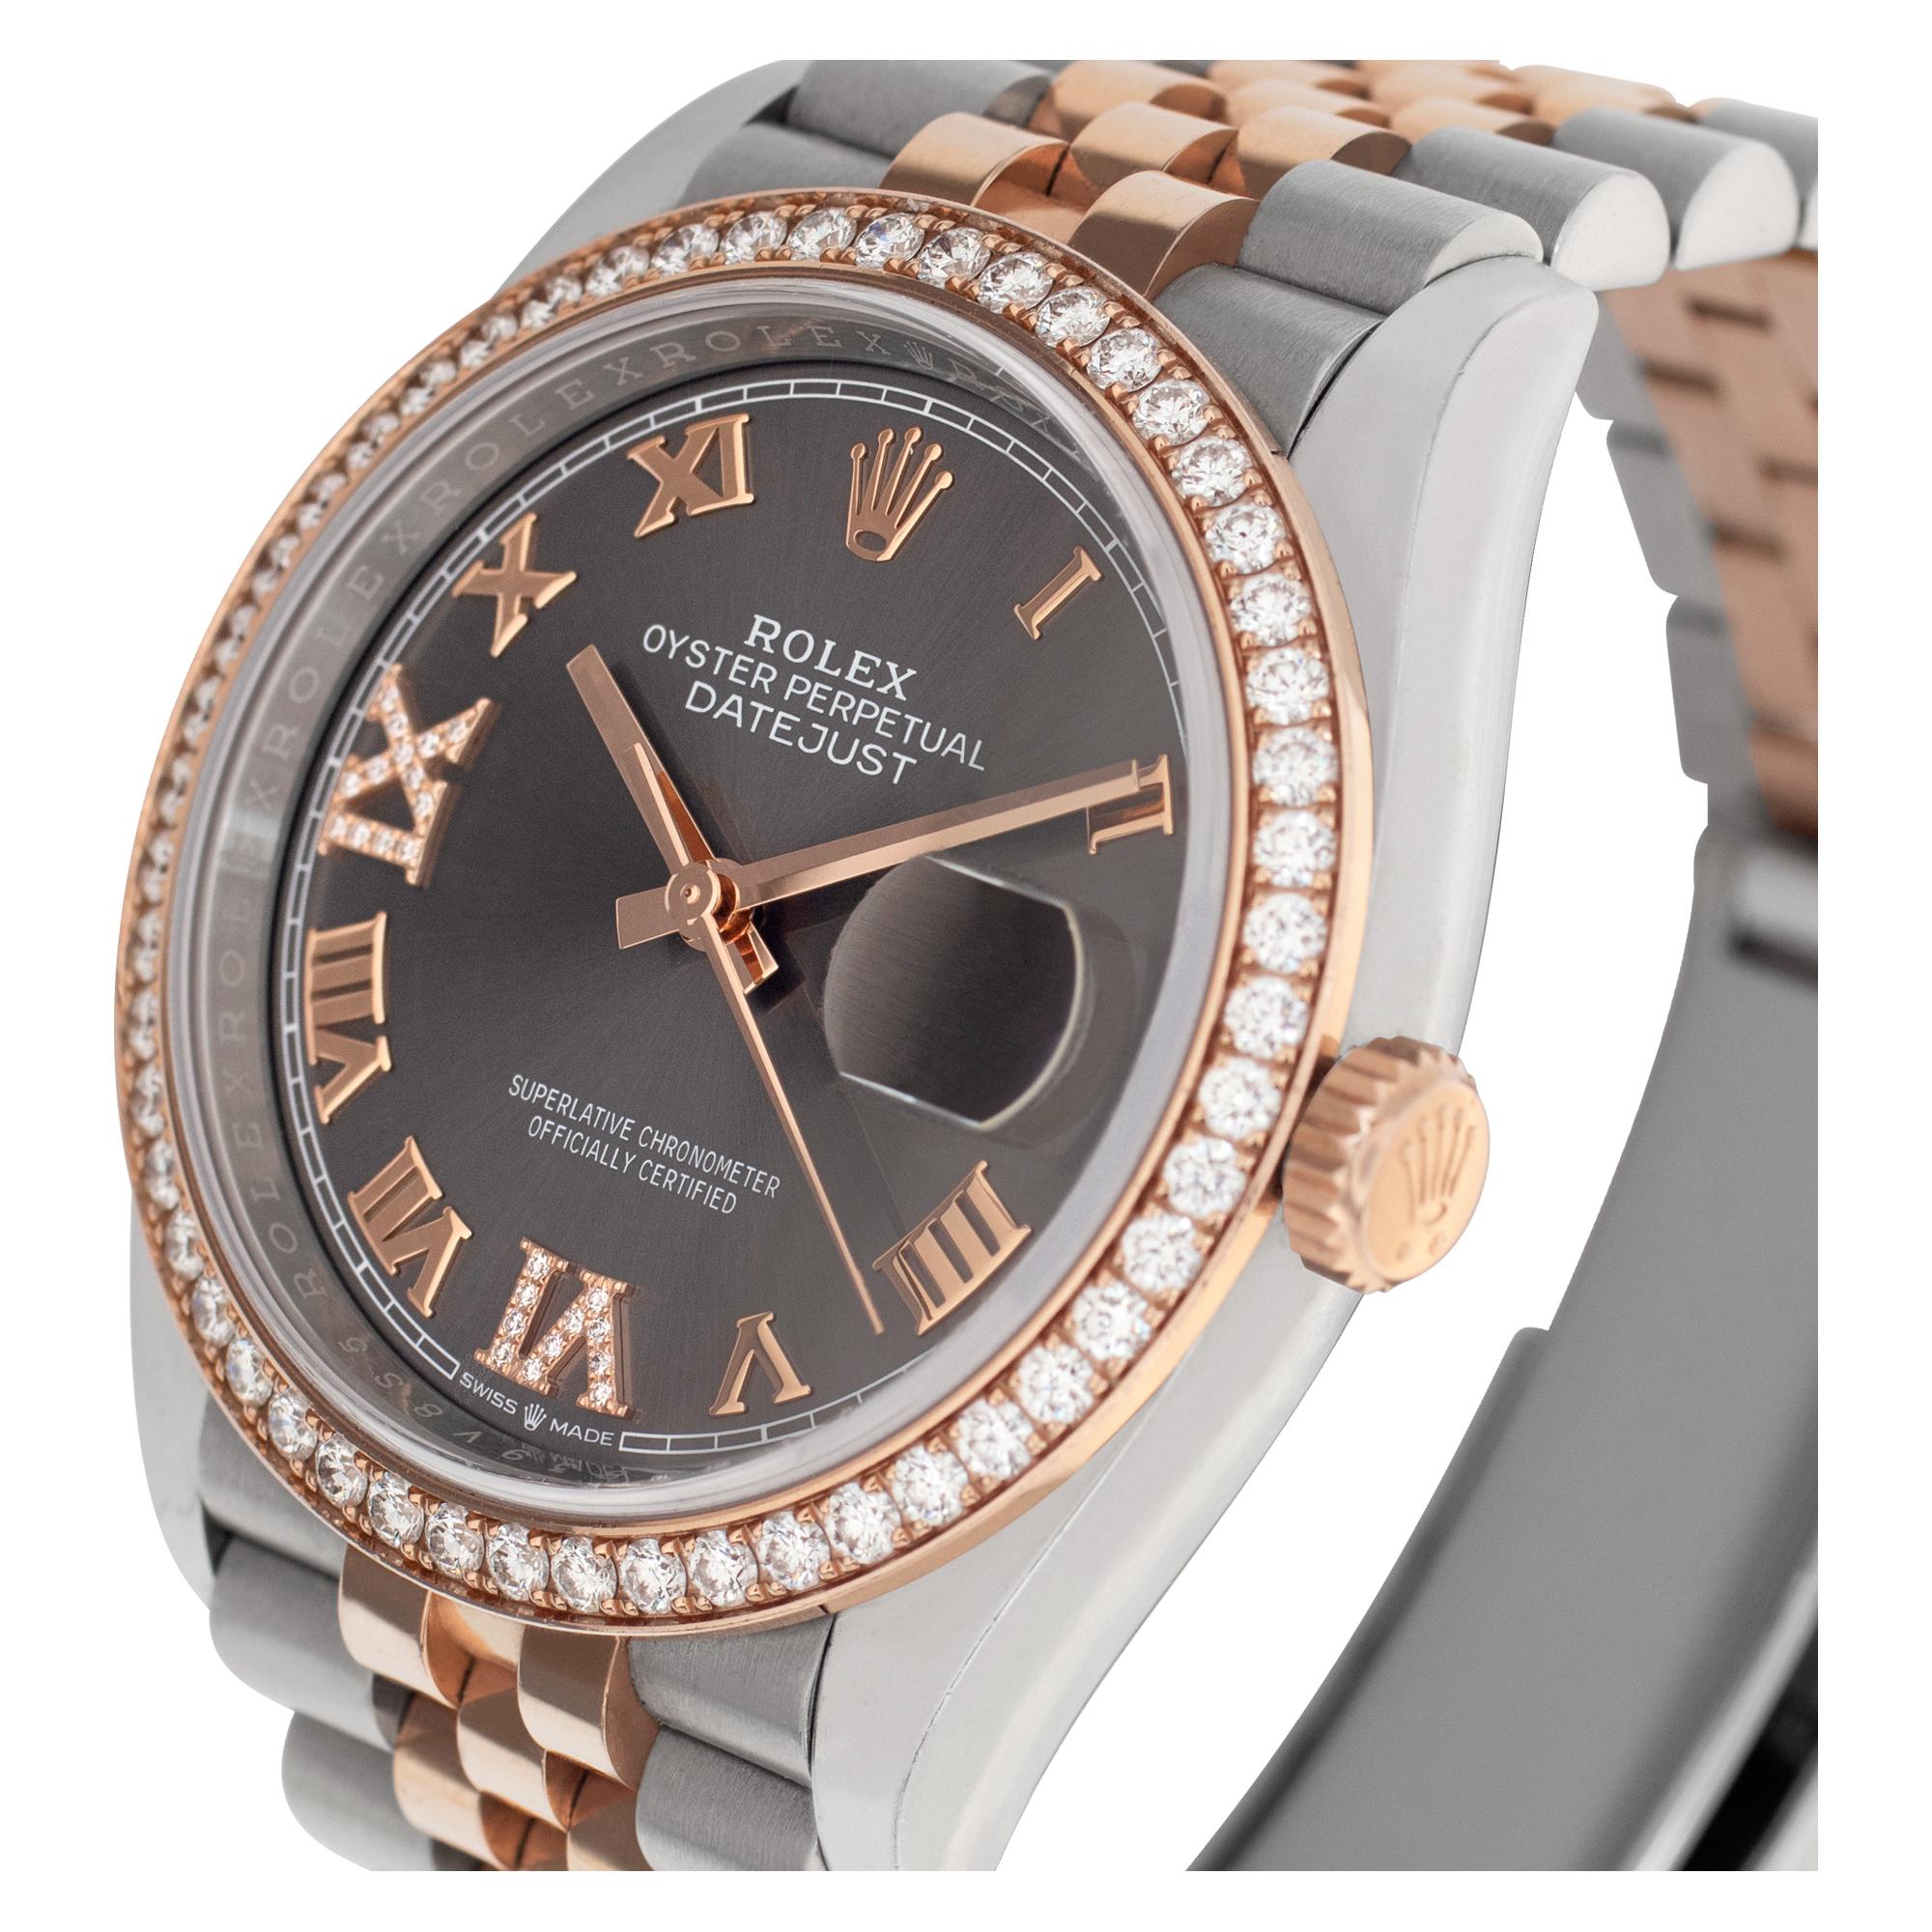 Women's or Men's Rolex Datejust in Stainless Steel & 18k Rose Gold, Ref. 126281 RBR